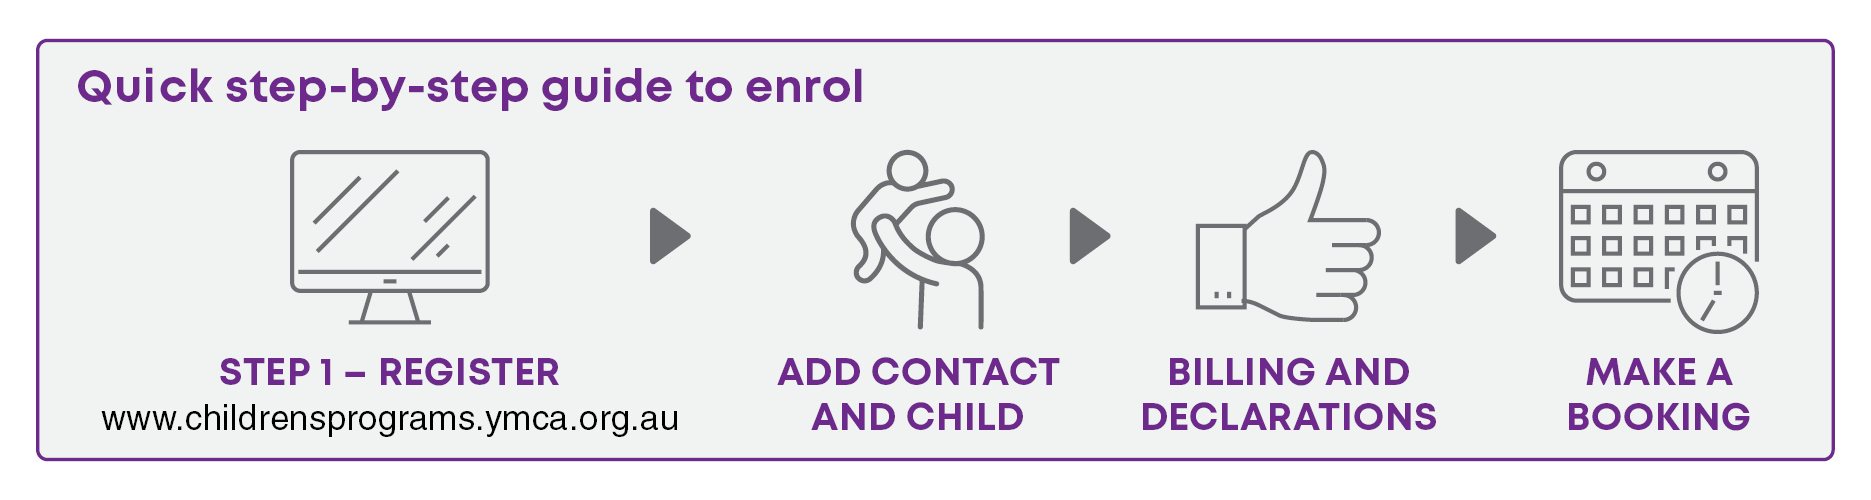 Quick 4-step enrolment guide mini infographic for OSHC at the Y Victoria